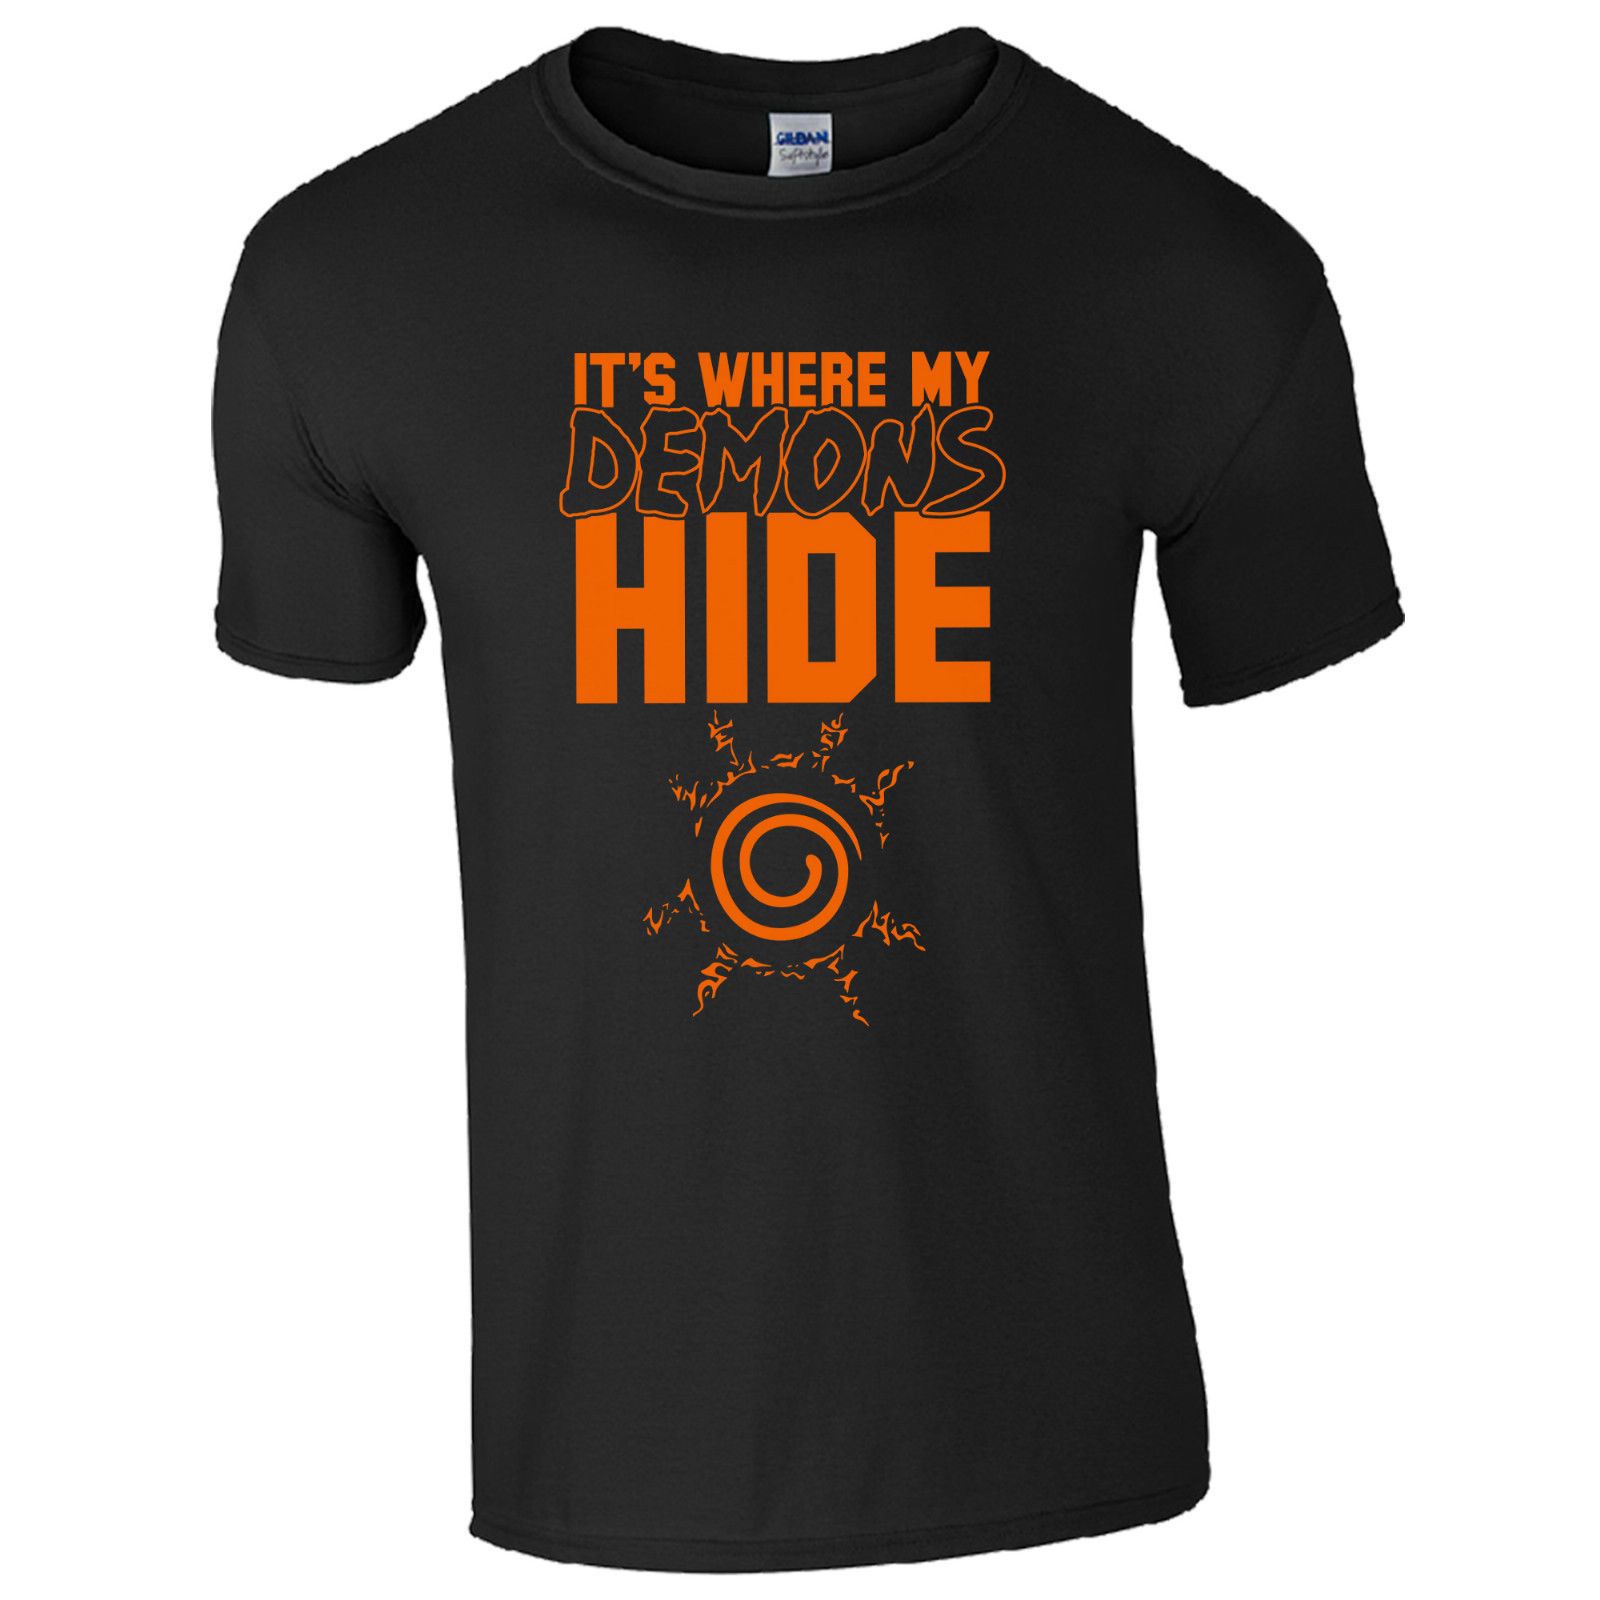 ItS Where My Demons Hide T Shirt Naruto Fan Inspired Anime Gift